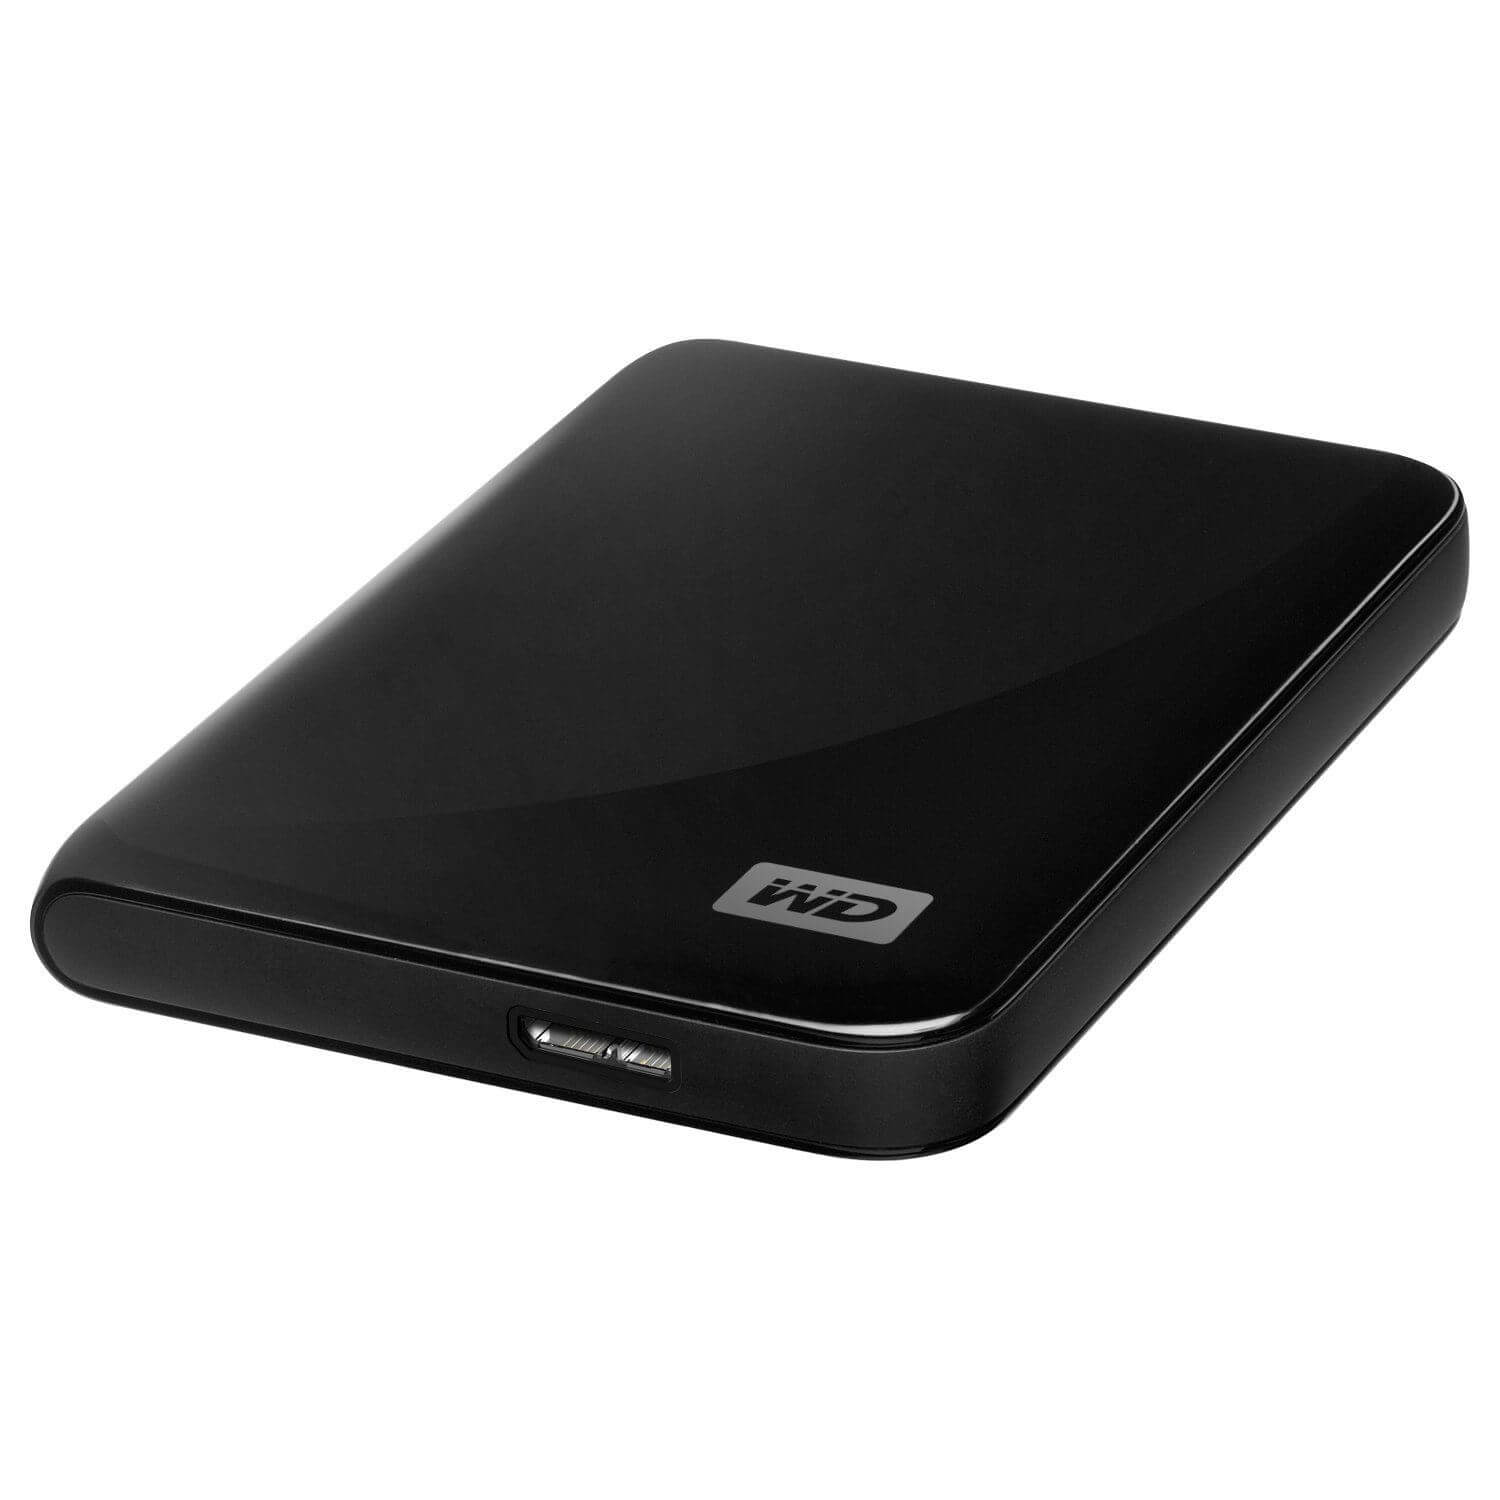 How to Recover Data from Western Digital Hard Drives?